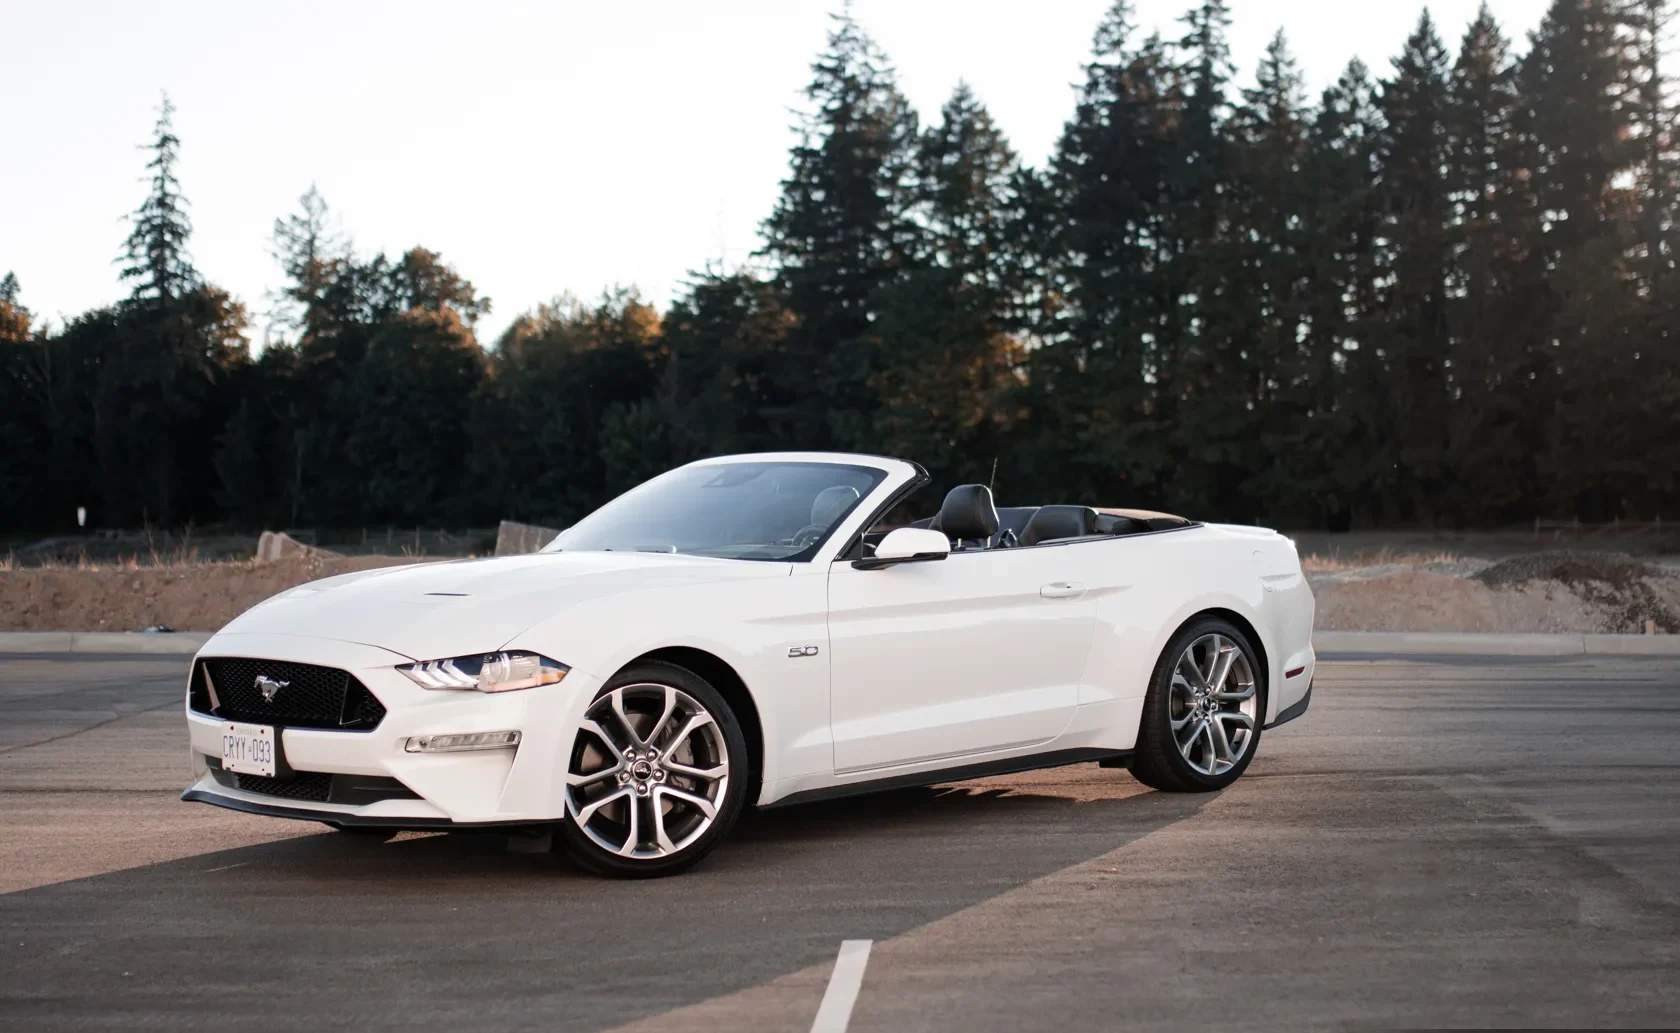 Mustang Of The Day: 2021 Ford Mustang GT Convertible